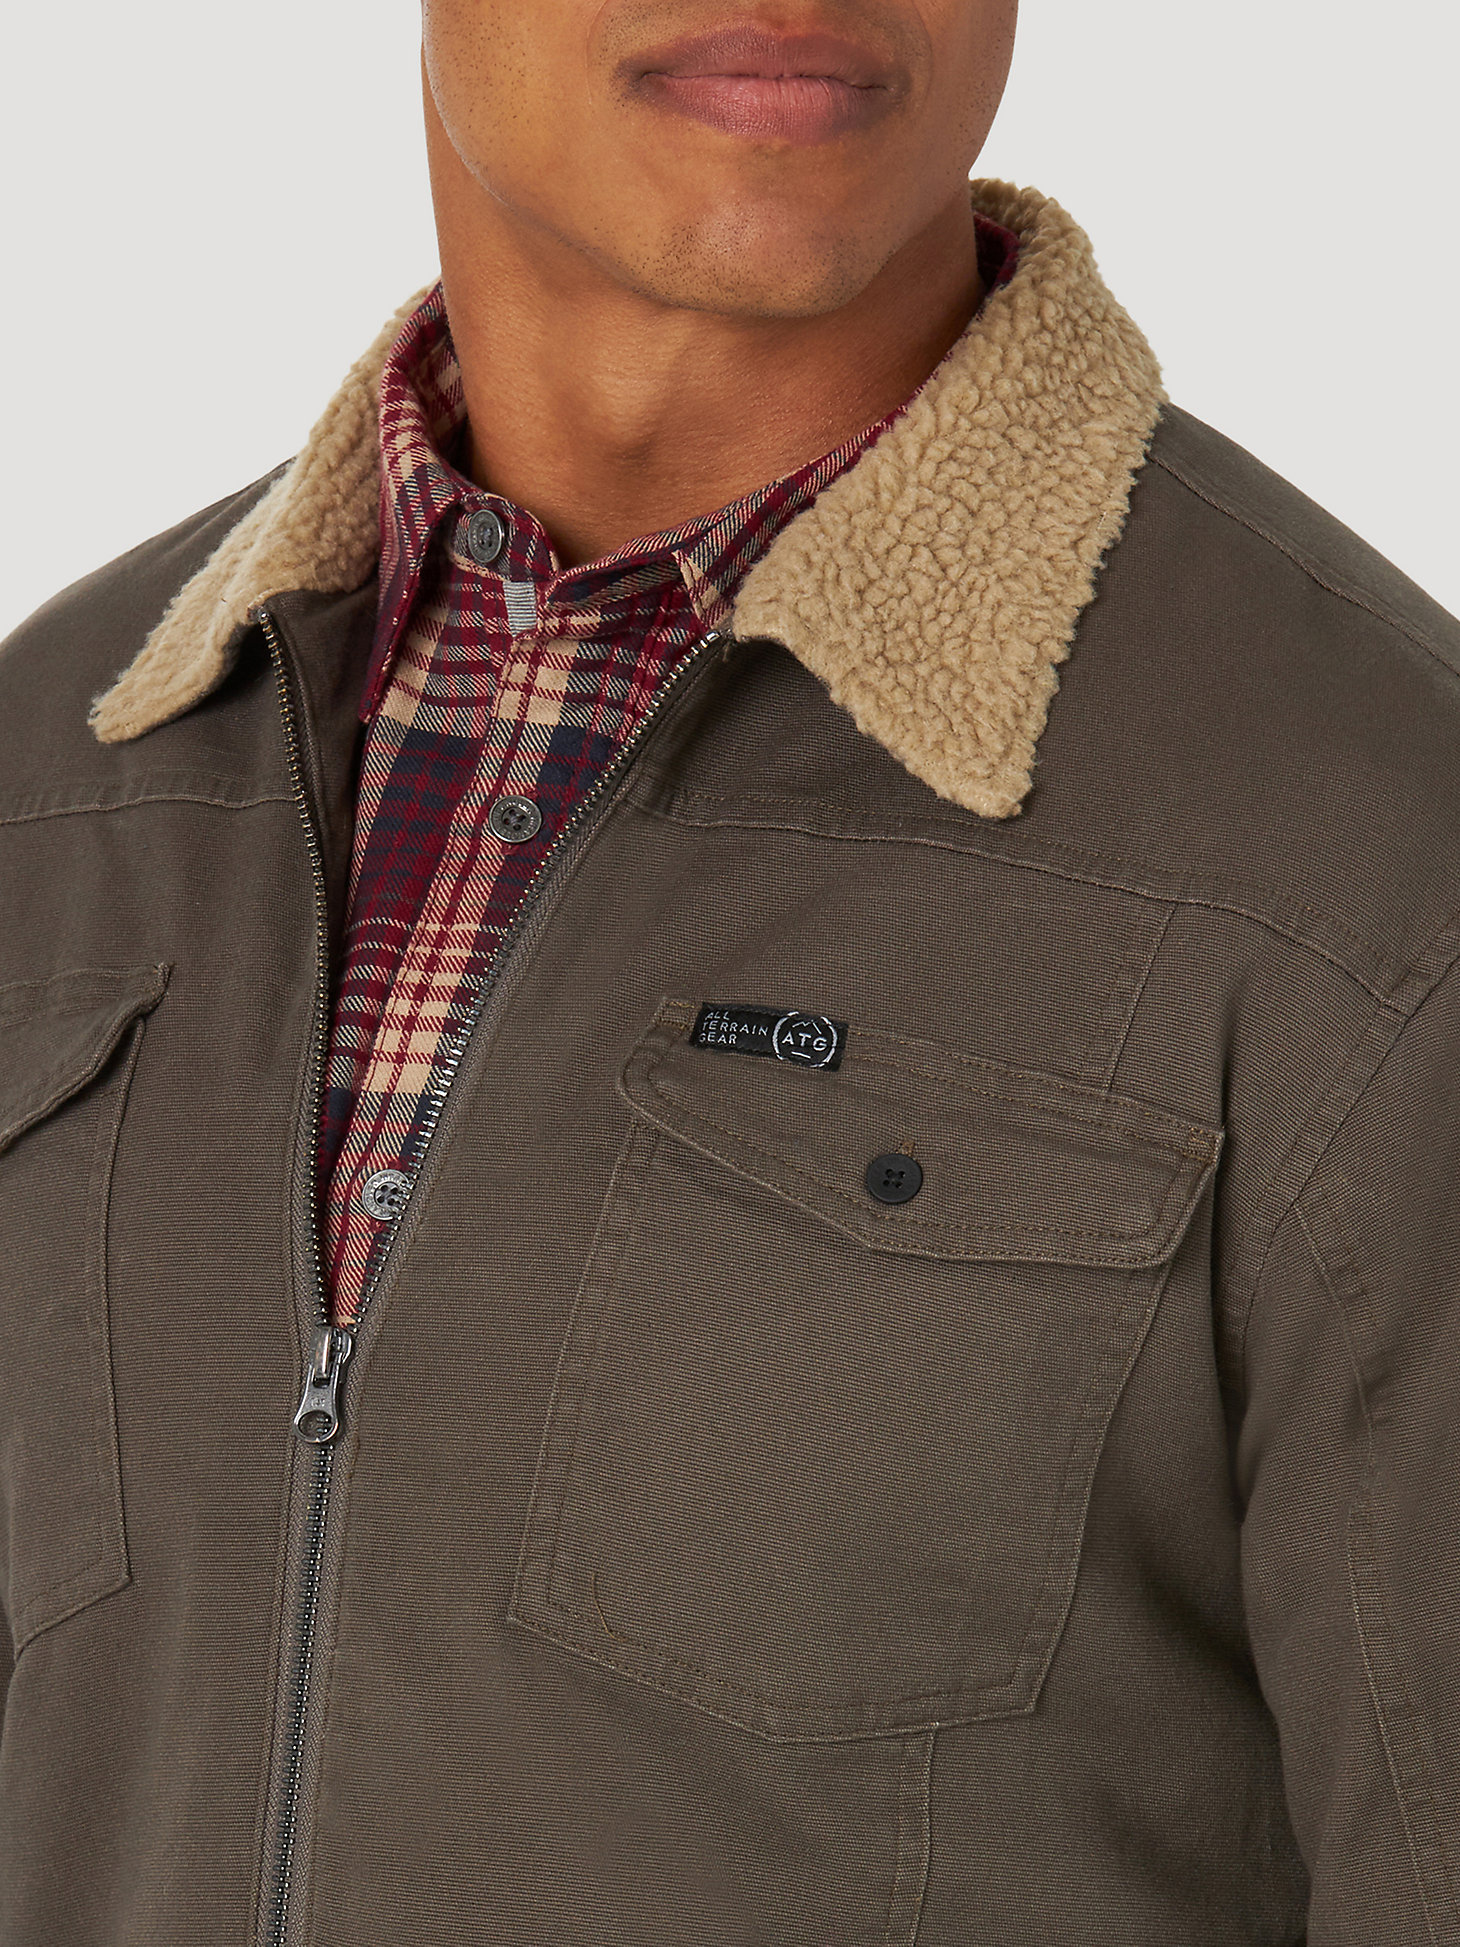 ATG by Wrangler™ Men's Sherpa Lined Canvas Jacket